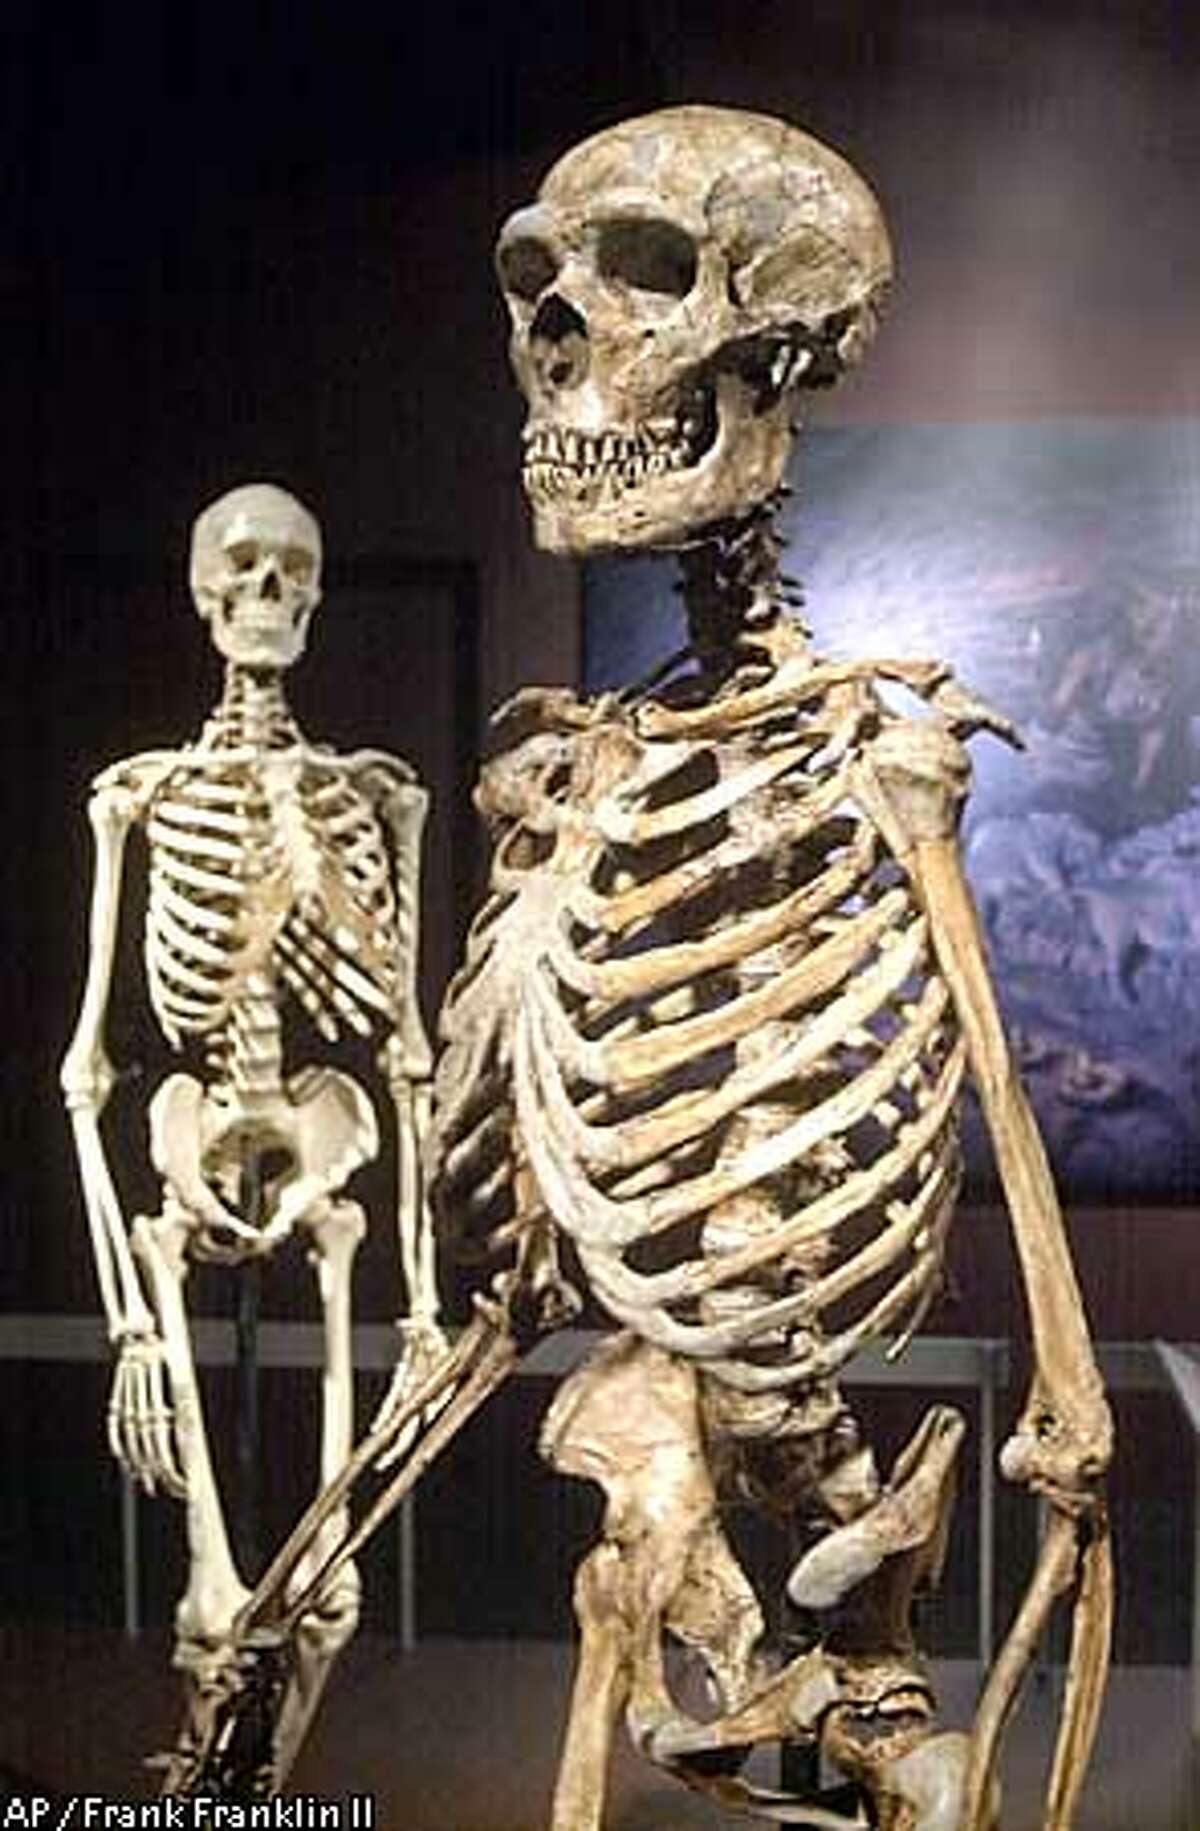 A reconstructed Neanderthal skeleton, right, and a modern version of a Homo sapiens skeleton are on display at the Museaum of Natural History Wednesday, Jan. 8, 2003 in New York. The Neanderthal skeleton, reconstructed from casts of more than 200 Neanderthal fossil bones, is part of the museum's exhibit called "The : Treasures from the Hills of Atapuerca." (AP Photo/Frank Franklin II)